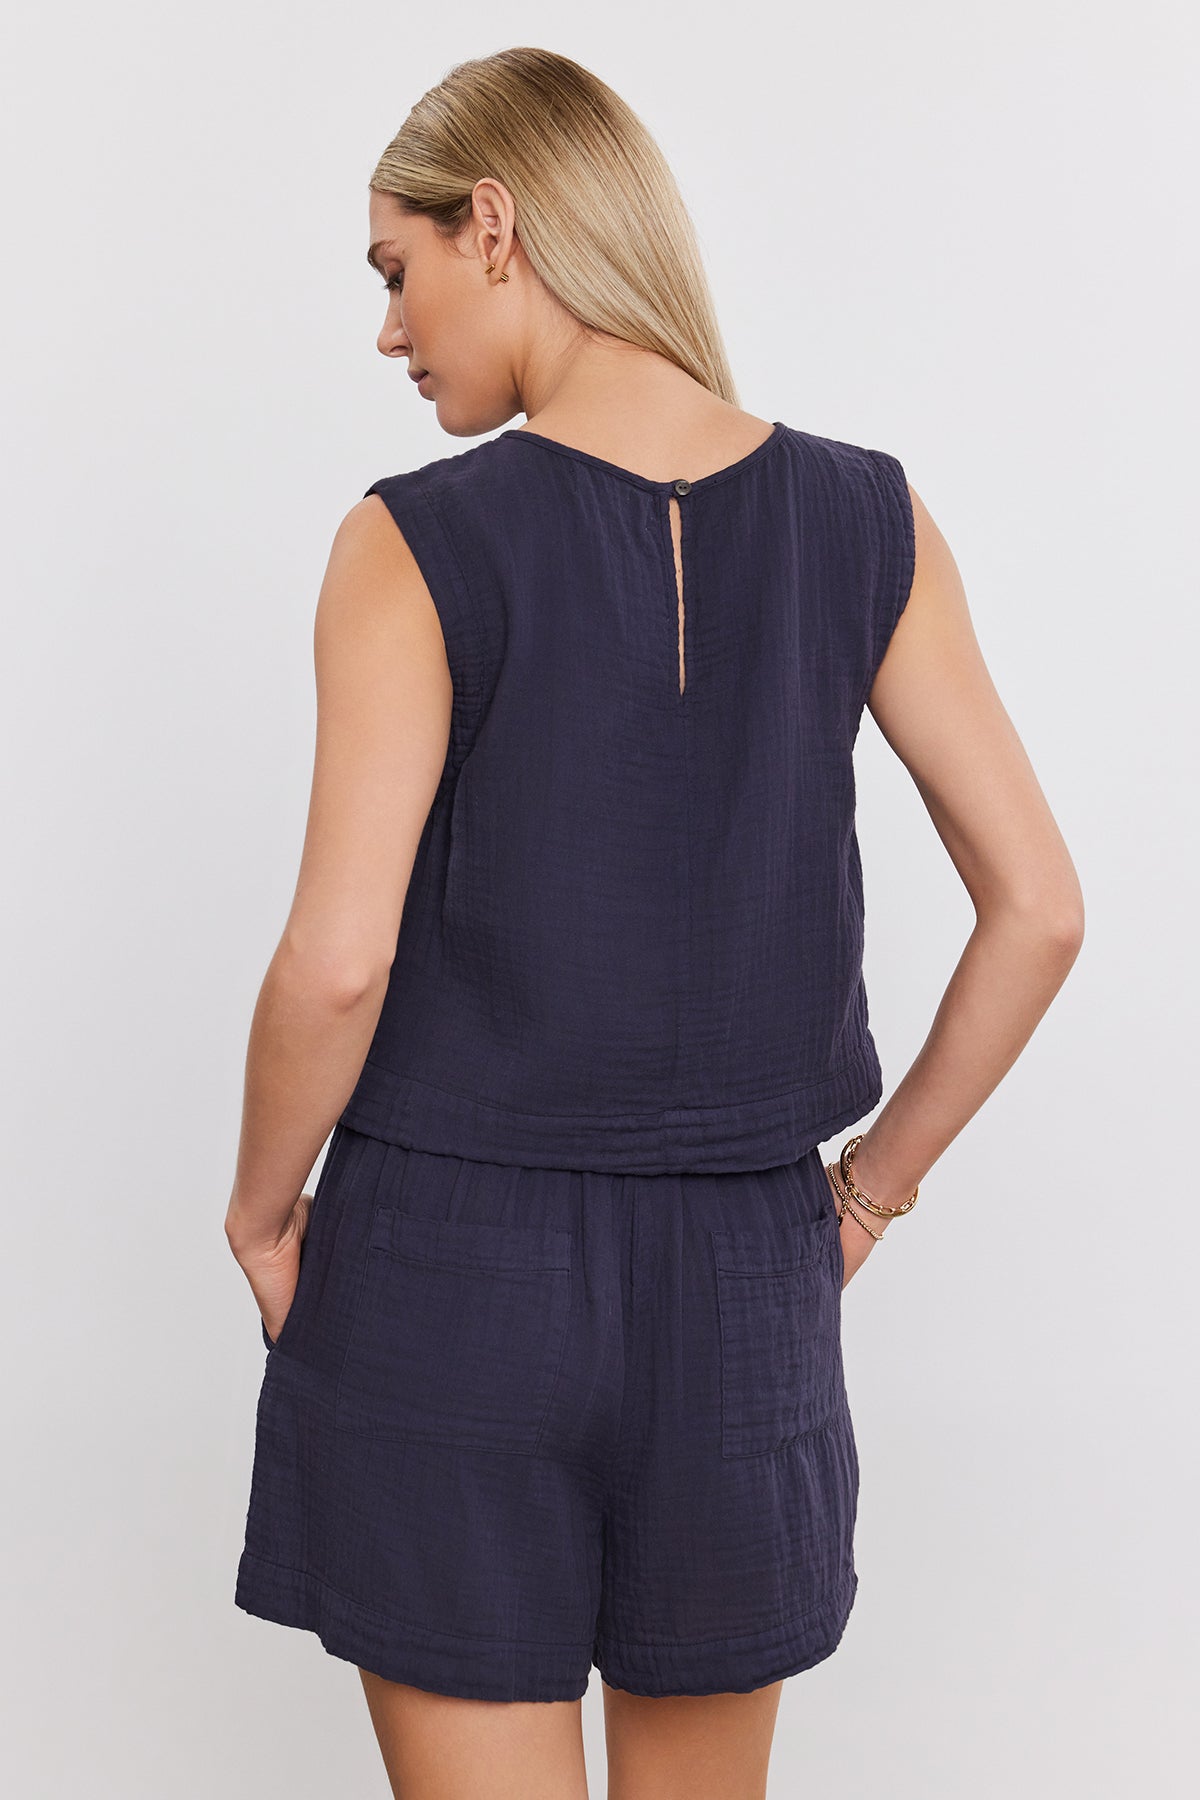 Woman wearing the AUBREN COTTON GAUZE TANK TOP by Velvet by Graham & Spencer, a sleeveless, navy blue top and matching shorts, viewed from the back. Made of airy cotton gauze, the ensemble features a cropped silhouette that adds to its casual charm. She has her hands in her pockets.-37452658999489